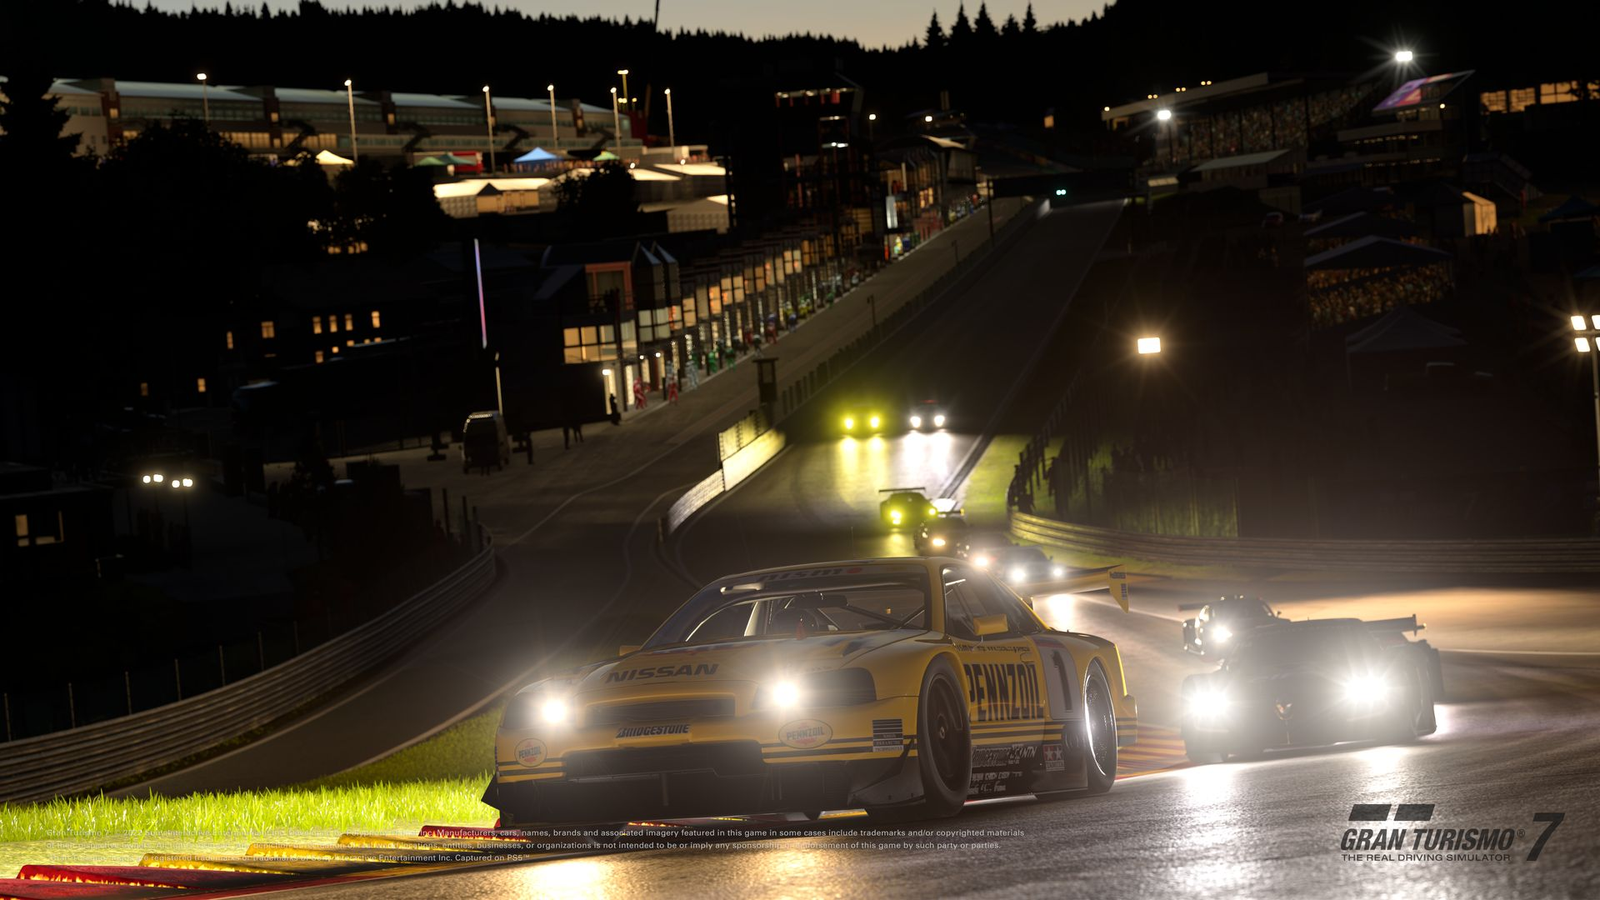 Gran Turismo 7 series lead is looking into bringing the racing game to PC